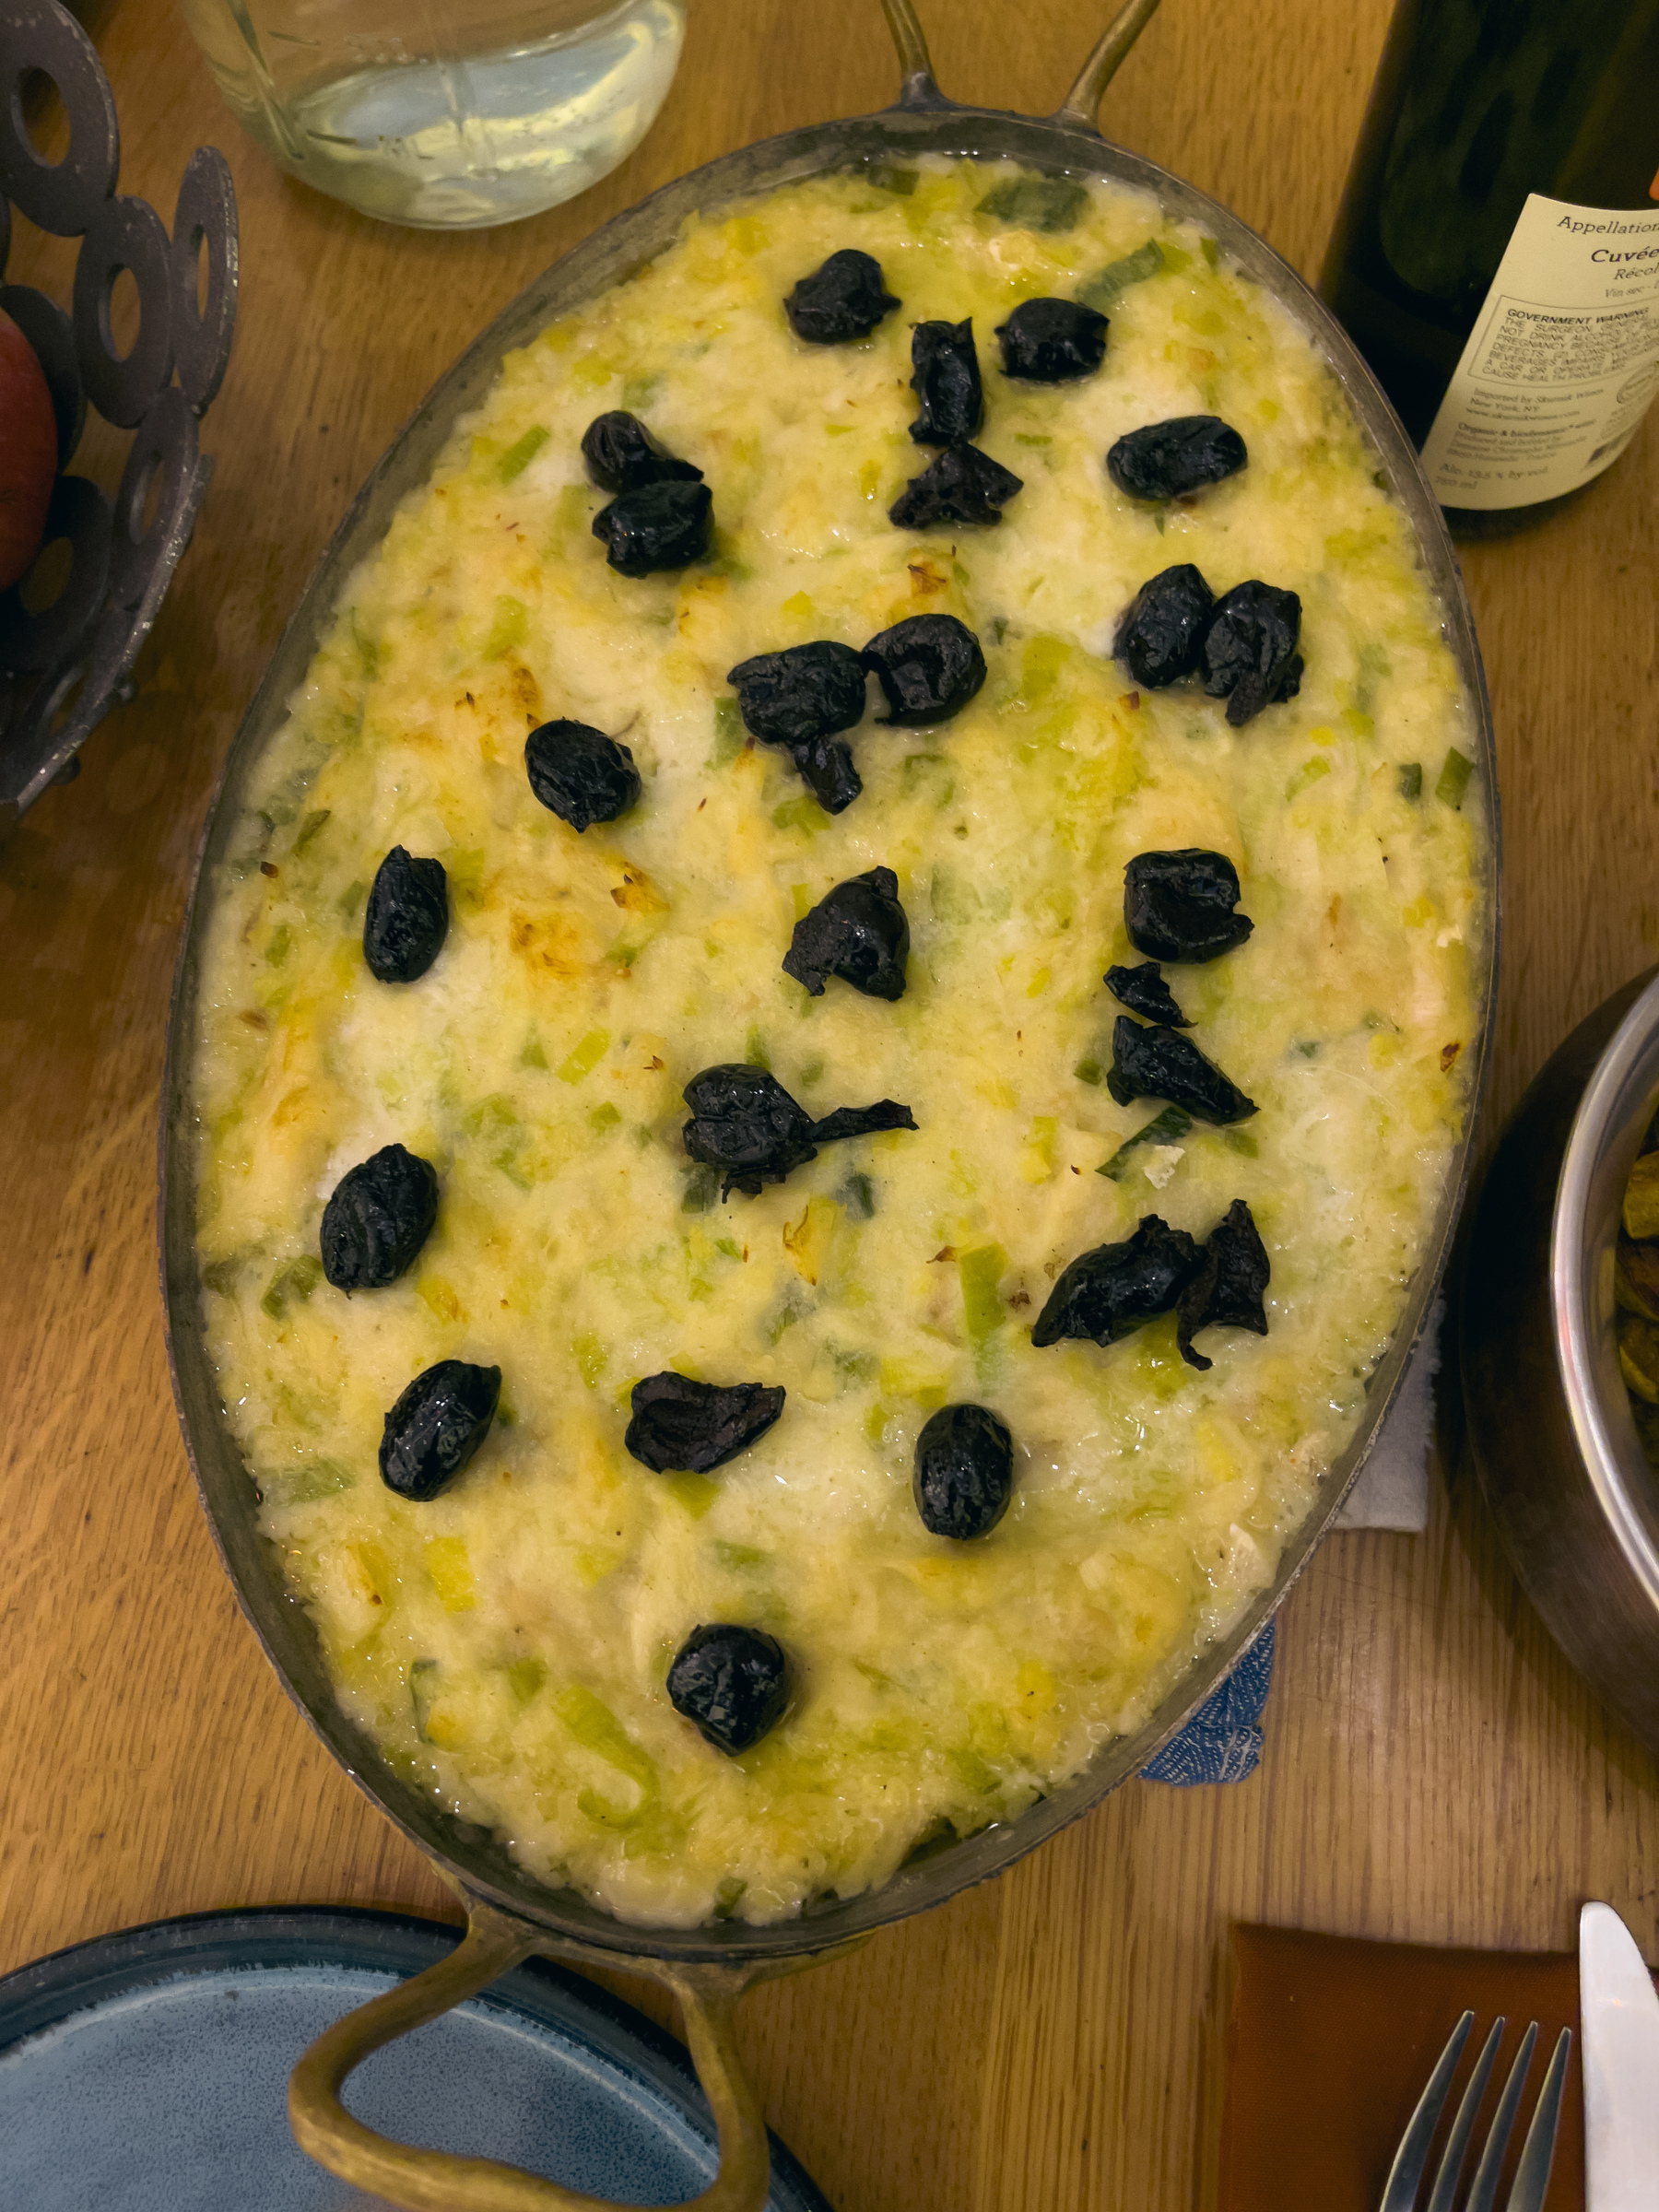 Completed salt cod and leek gratin dotted with oil cured olives in an oval metal baking dish.